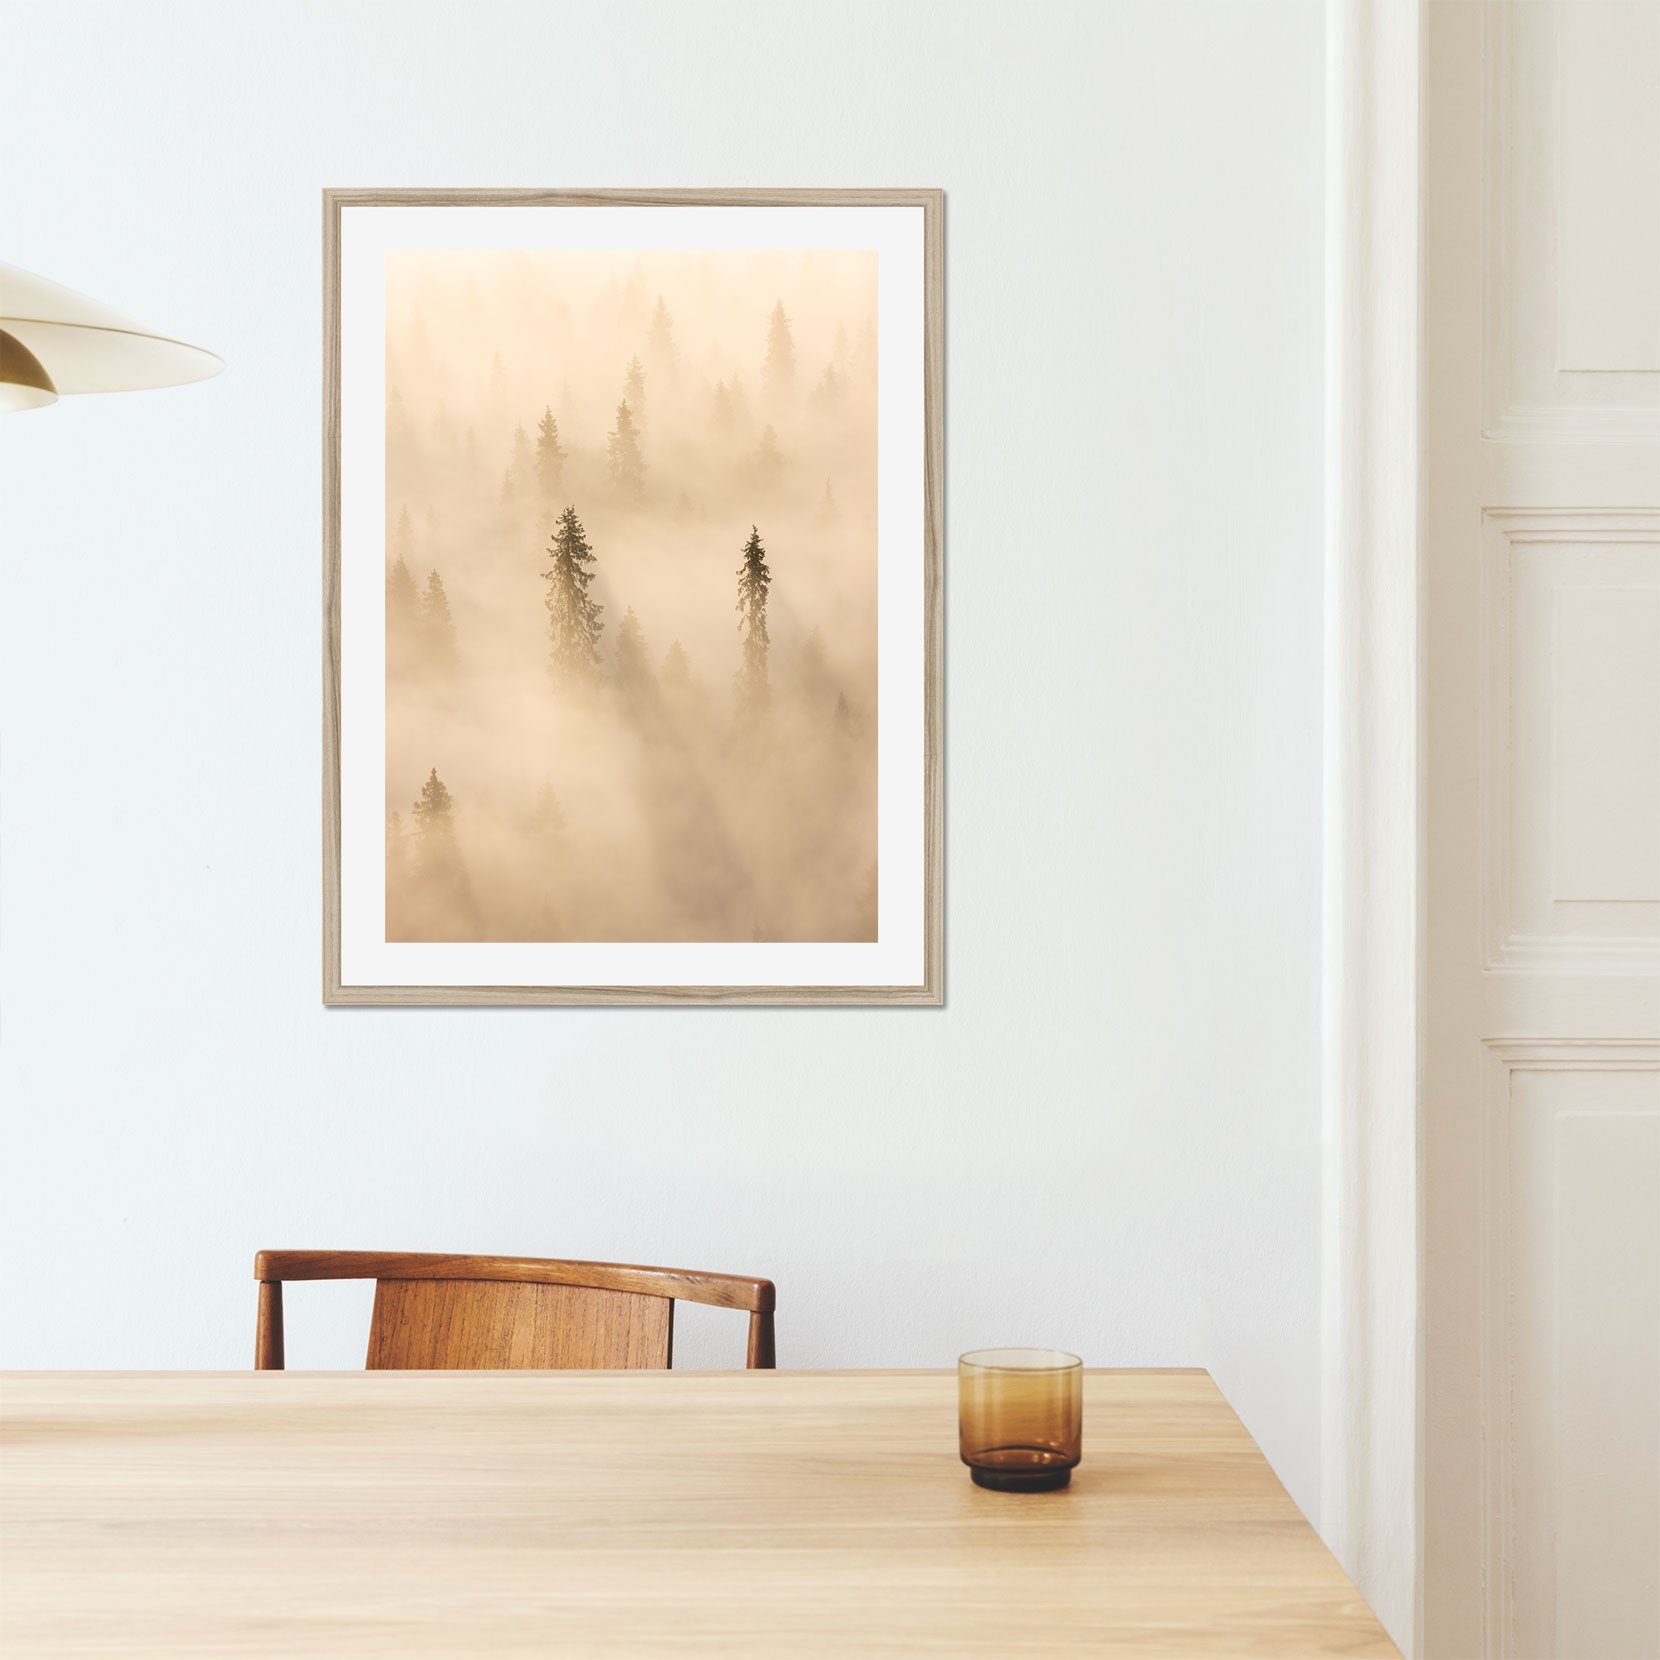 A framed print of tall pine trees in a golden fog